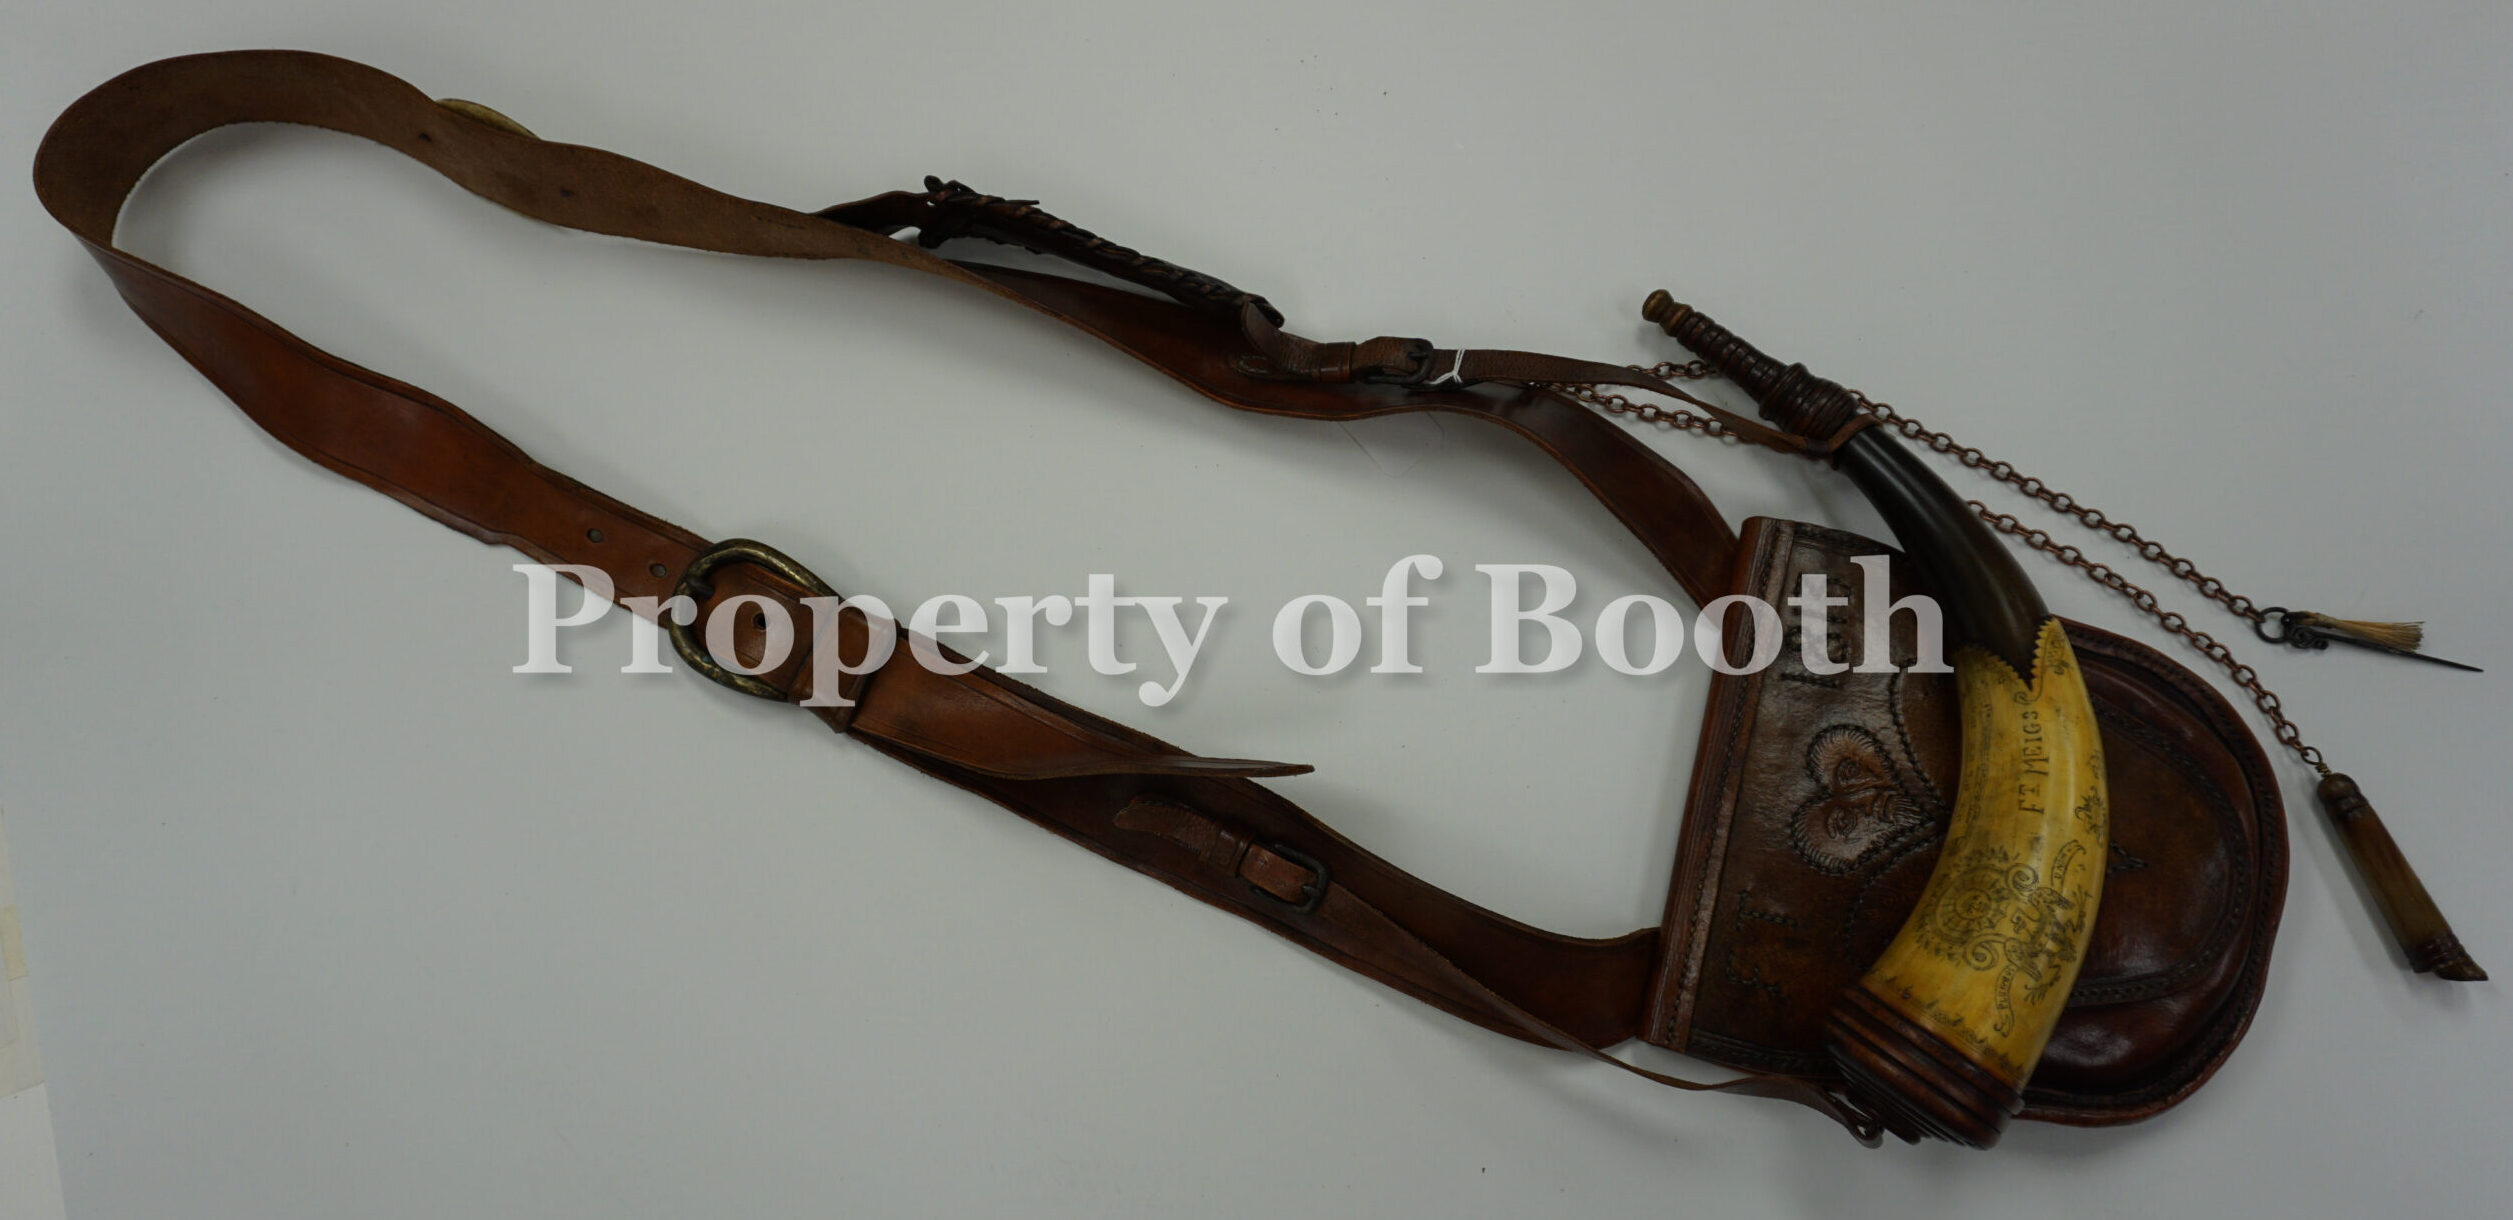 Powder horn with leather bag, 35 x 8.5 x 3", The Barbara H. & Robert P. Hunter, Jr. Legacy Collection